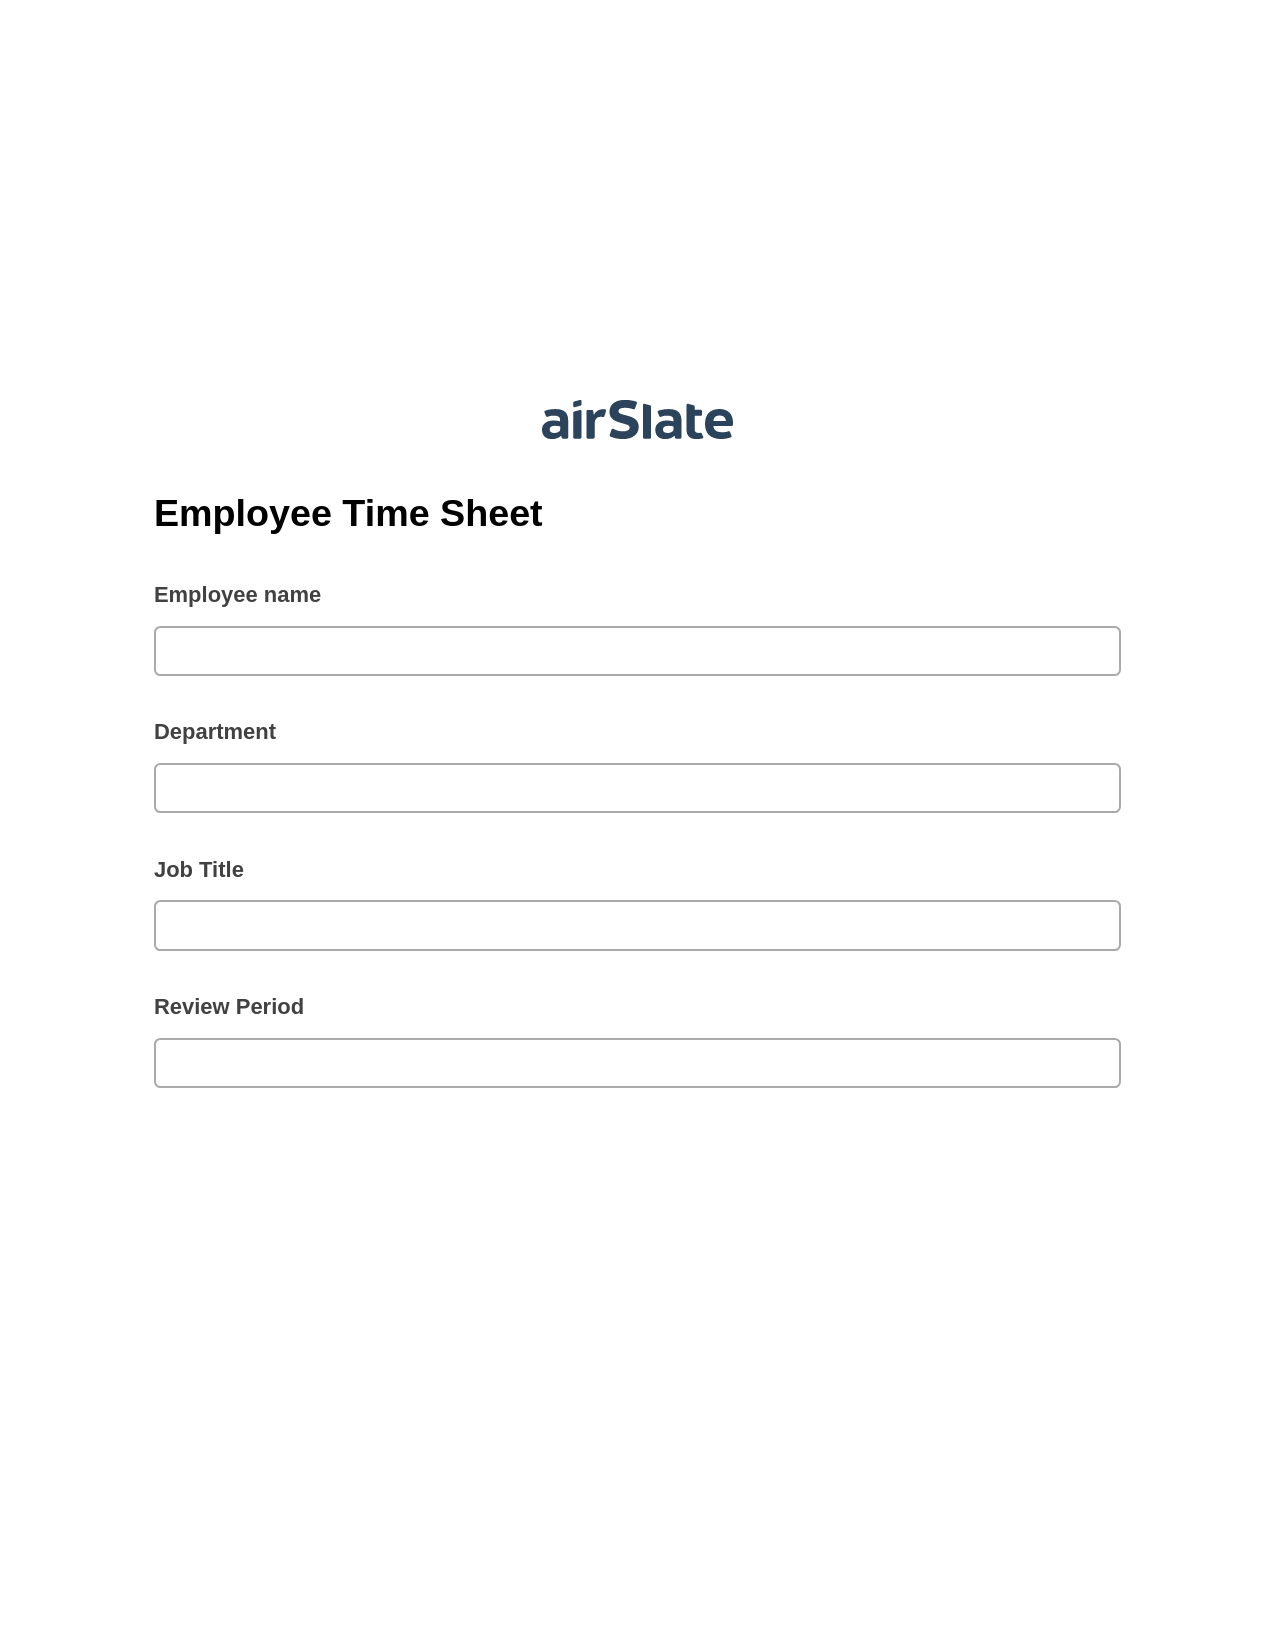 Employee Time Sheet Pre-fill from MS Dynamics 365 Records, Update Audit Trail Bot, Export to NetSuite Bot